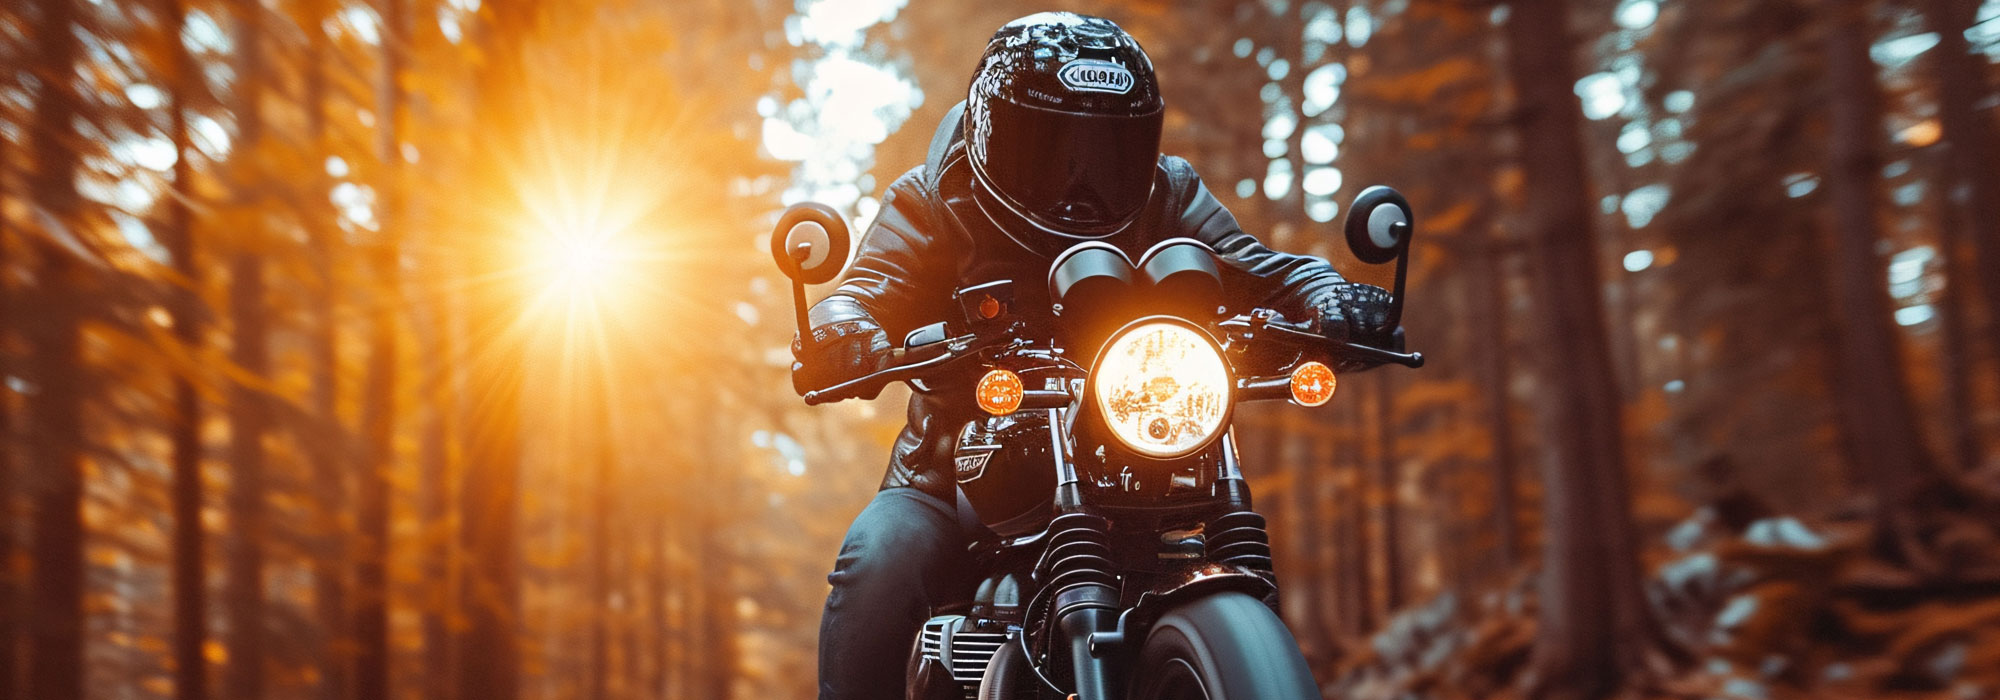 Man Riding Motorcycle in Forest